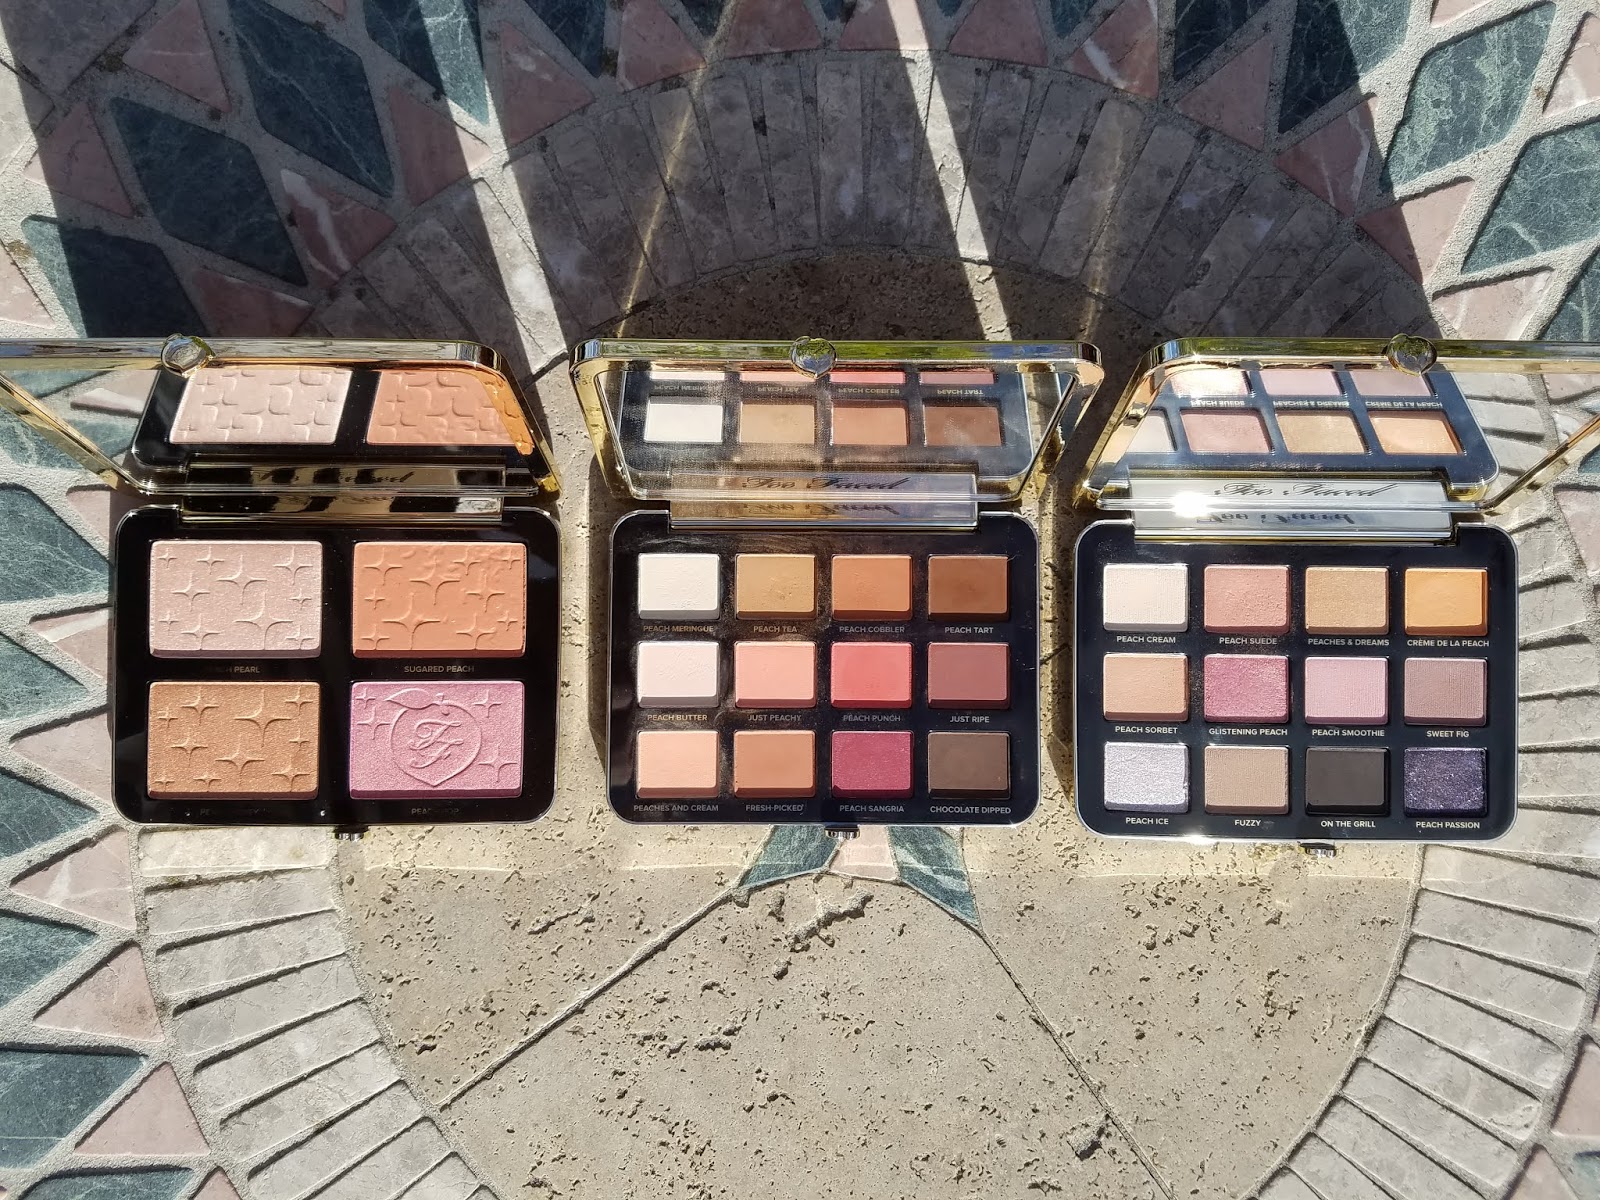 Peachy Palettes by Too Faced